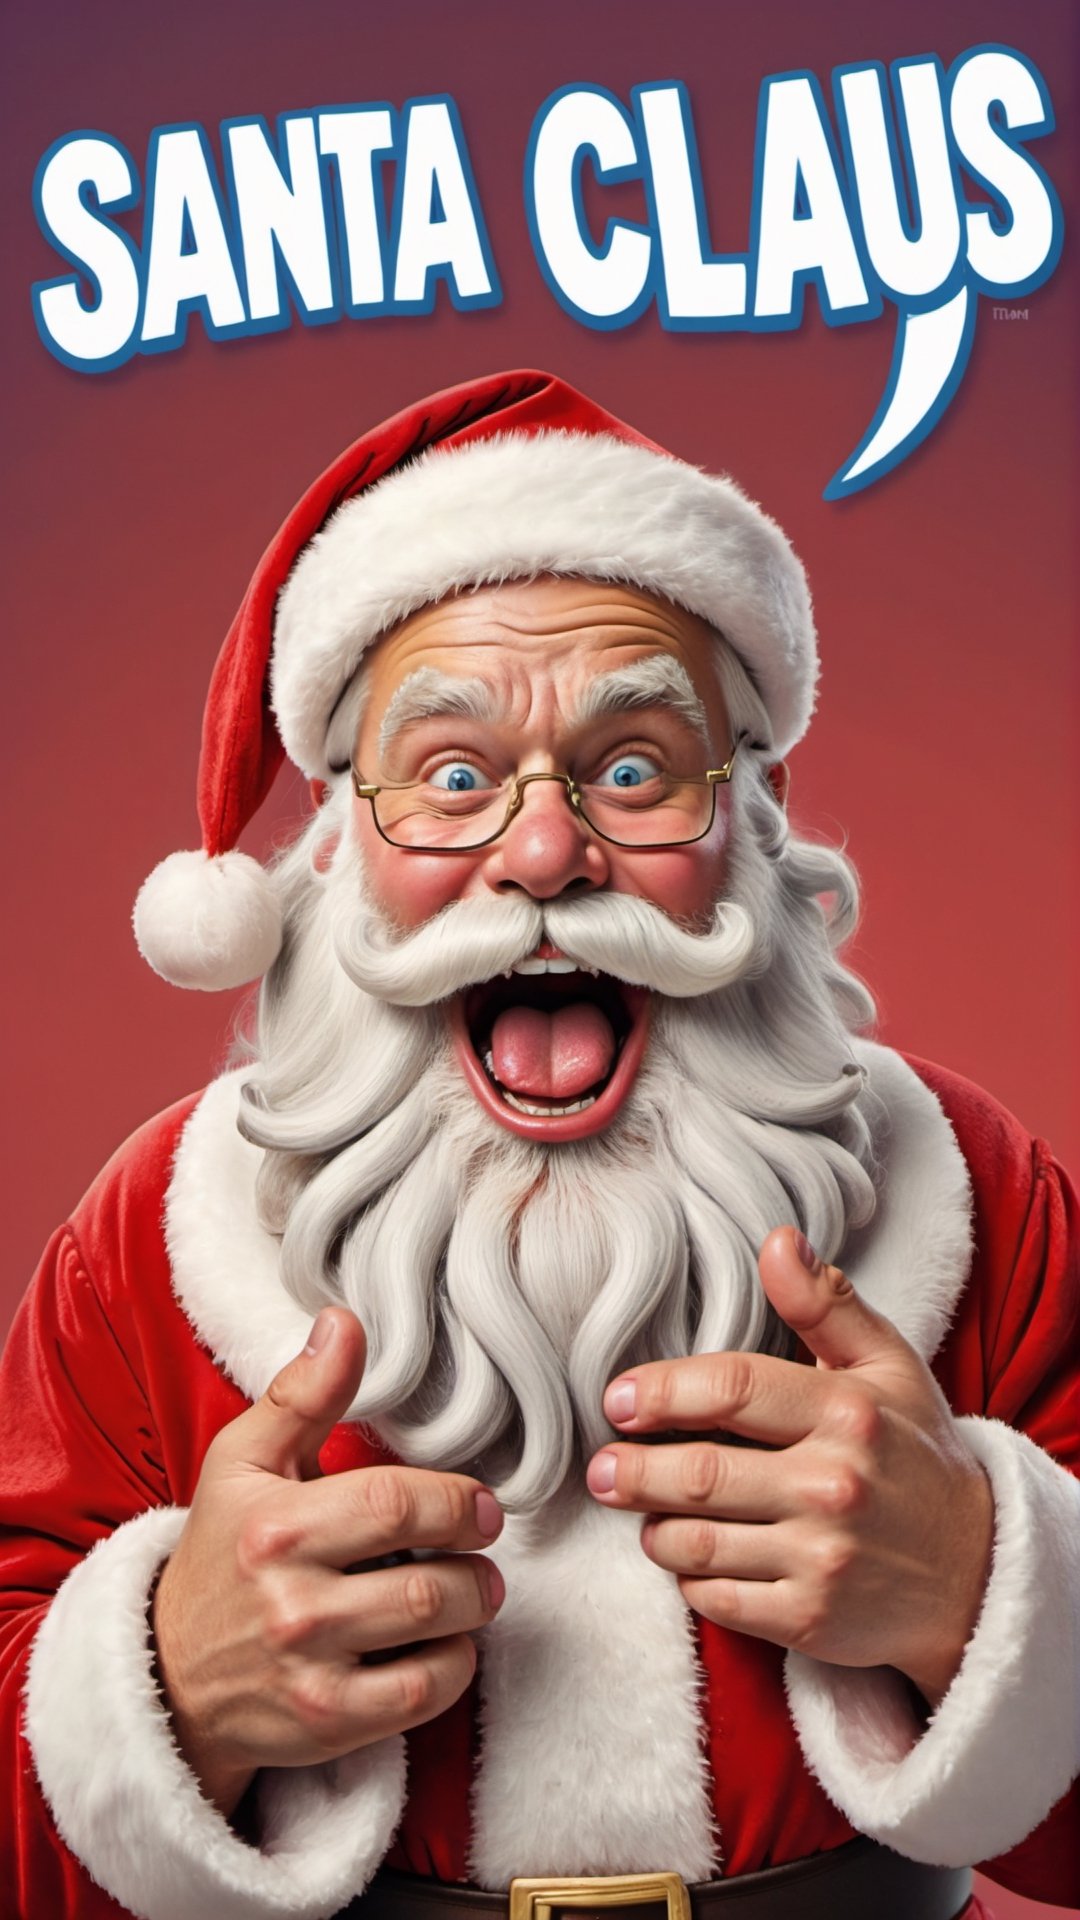 An illustration of Santa Claus as the subject of a viral meme, depicted in a funny or unexpected situation. Santa has a humorous, exaggerated expression, doing something silly, absurd or mischievous. The meme is visually dynamic with bold text, graphics, emojis or internet humor. The art style matches current viral meme aesthetics.